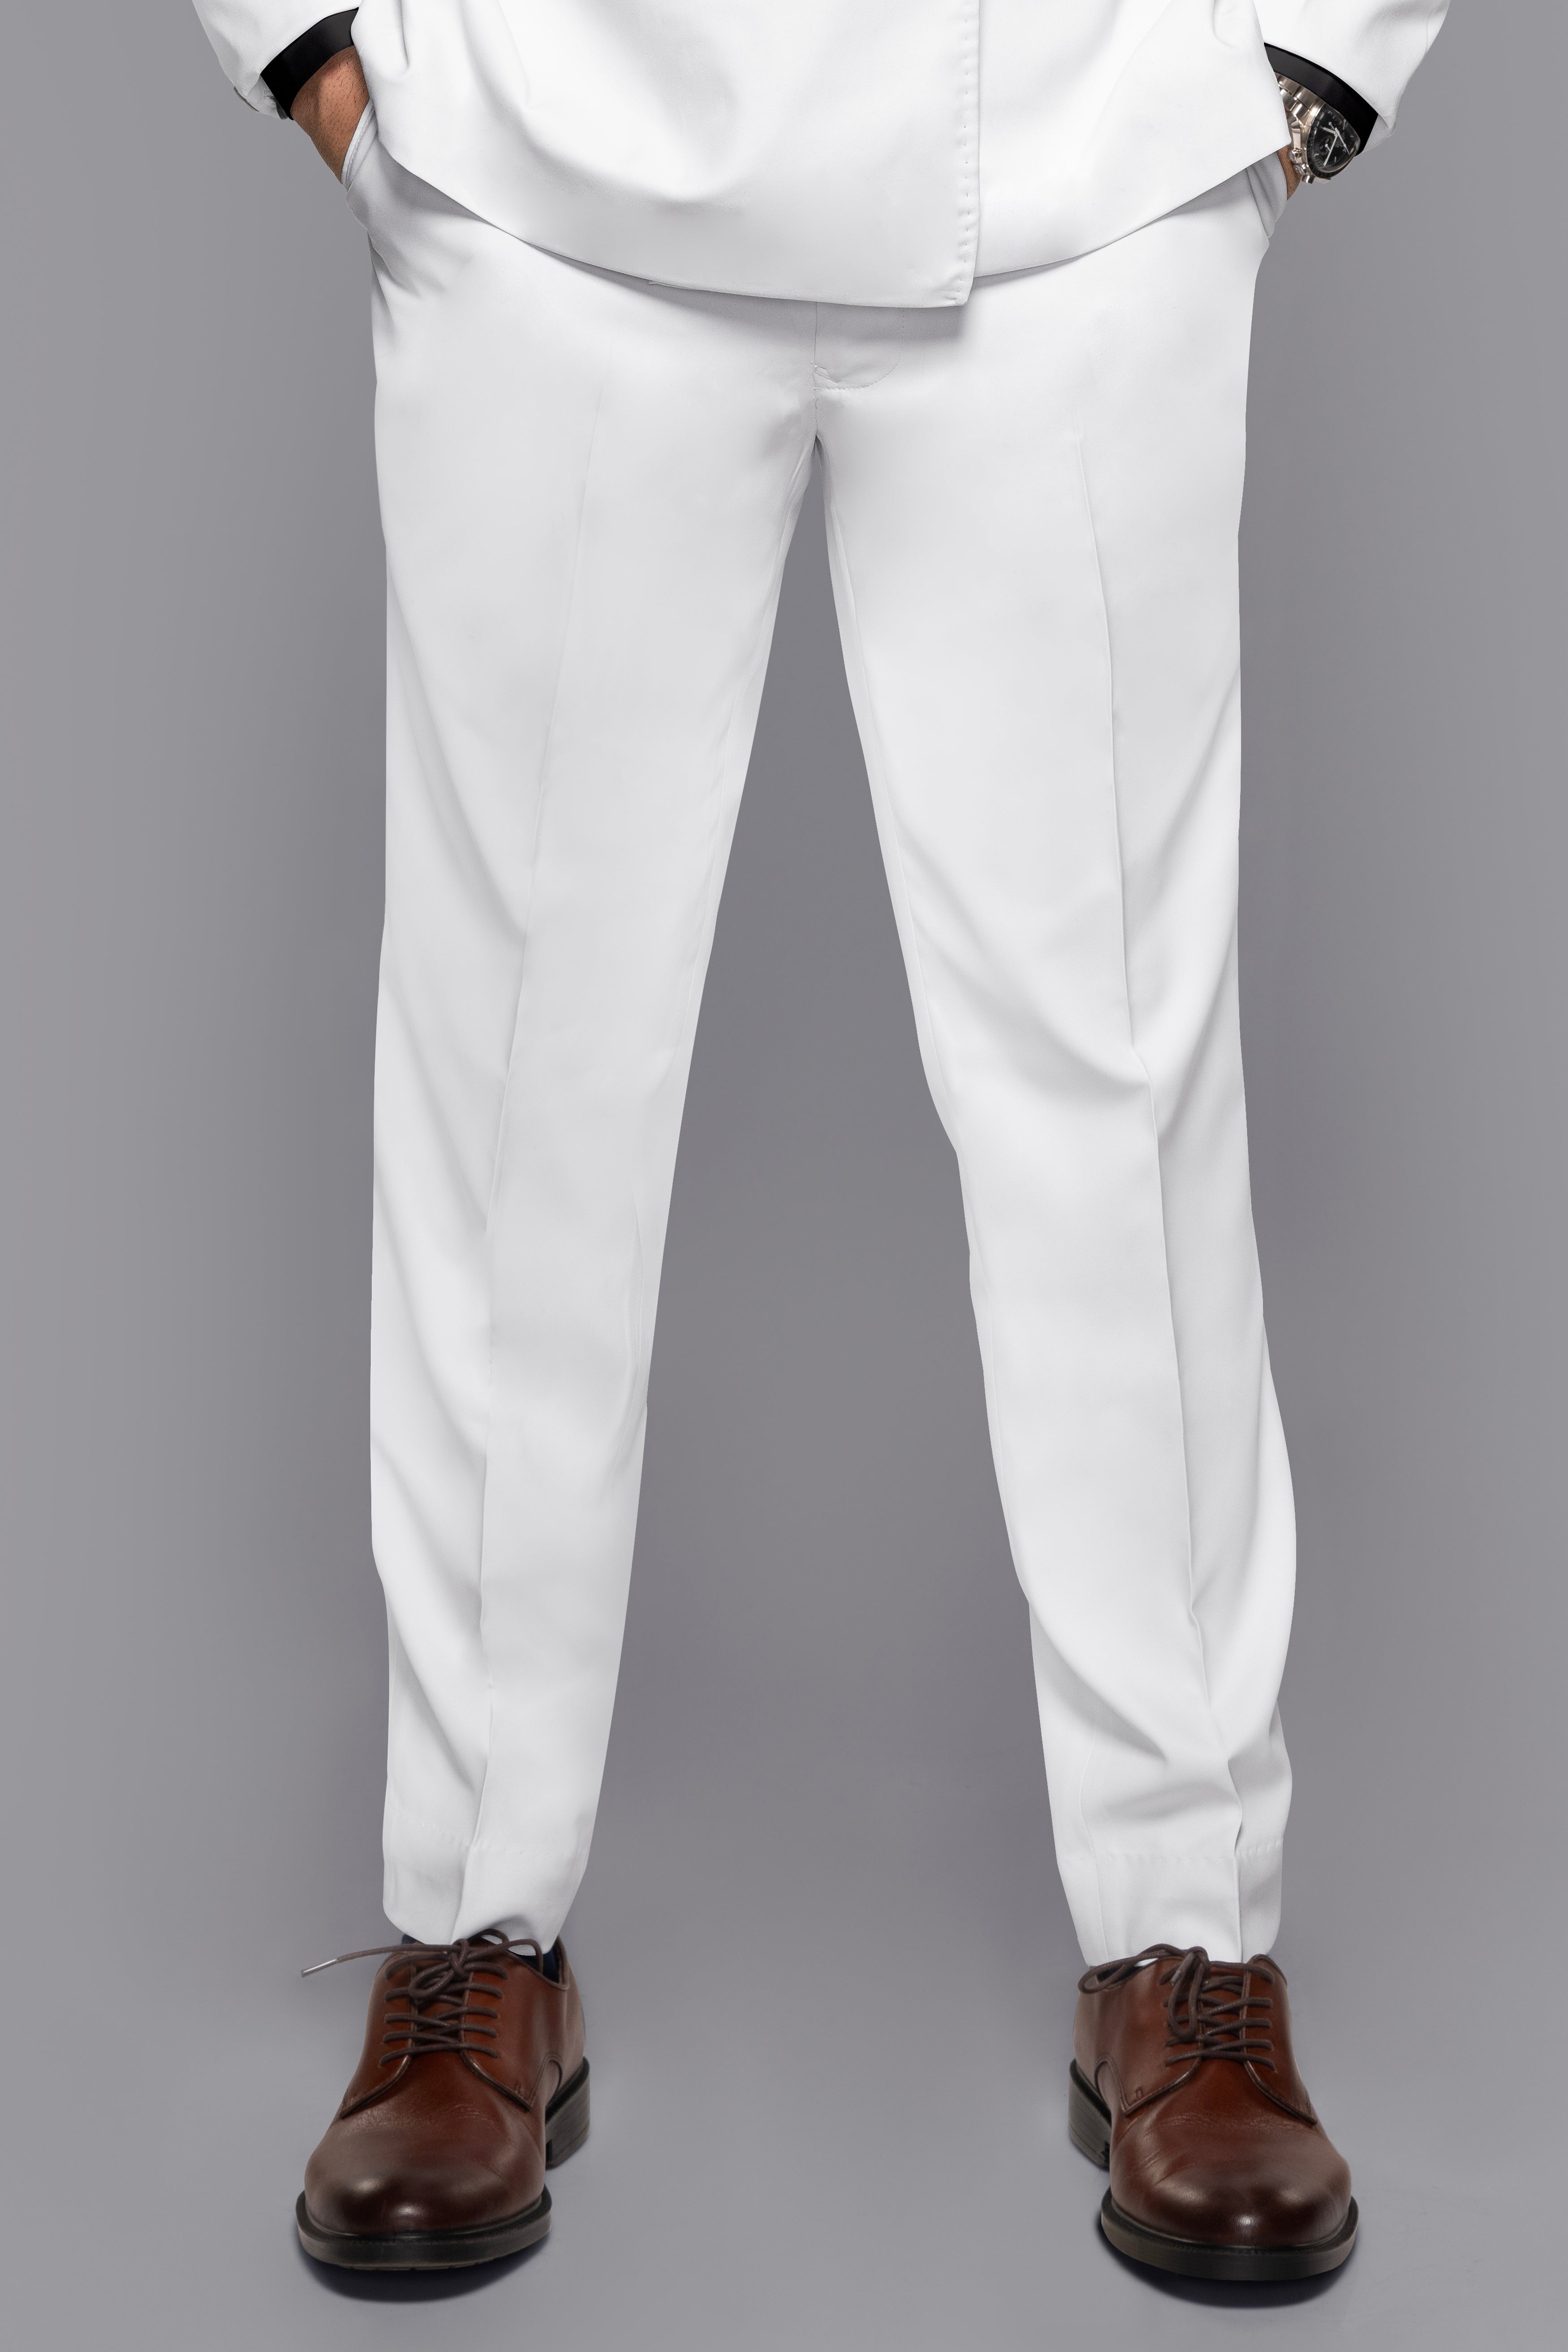 White Plain Solid Regular Fit Terry Rayon Pants For Men